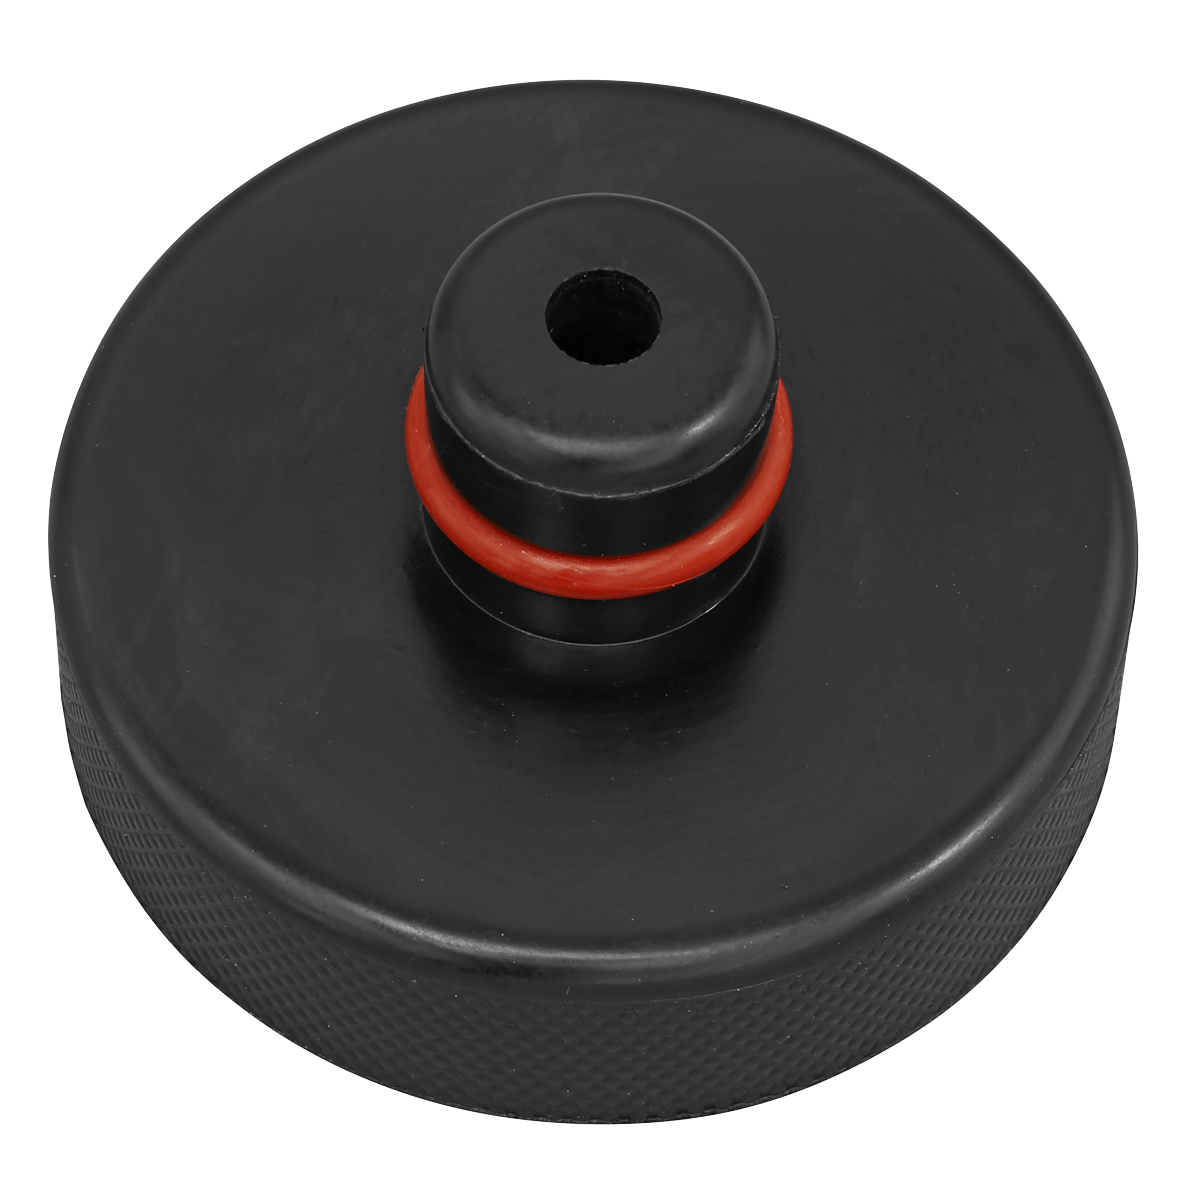 rubber o-ring on the spigot, creating a secure fit to the vehicle